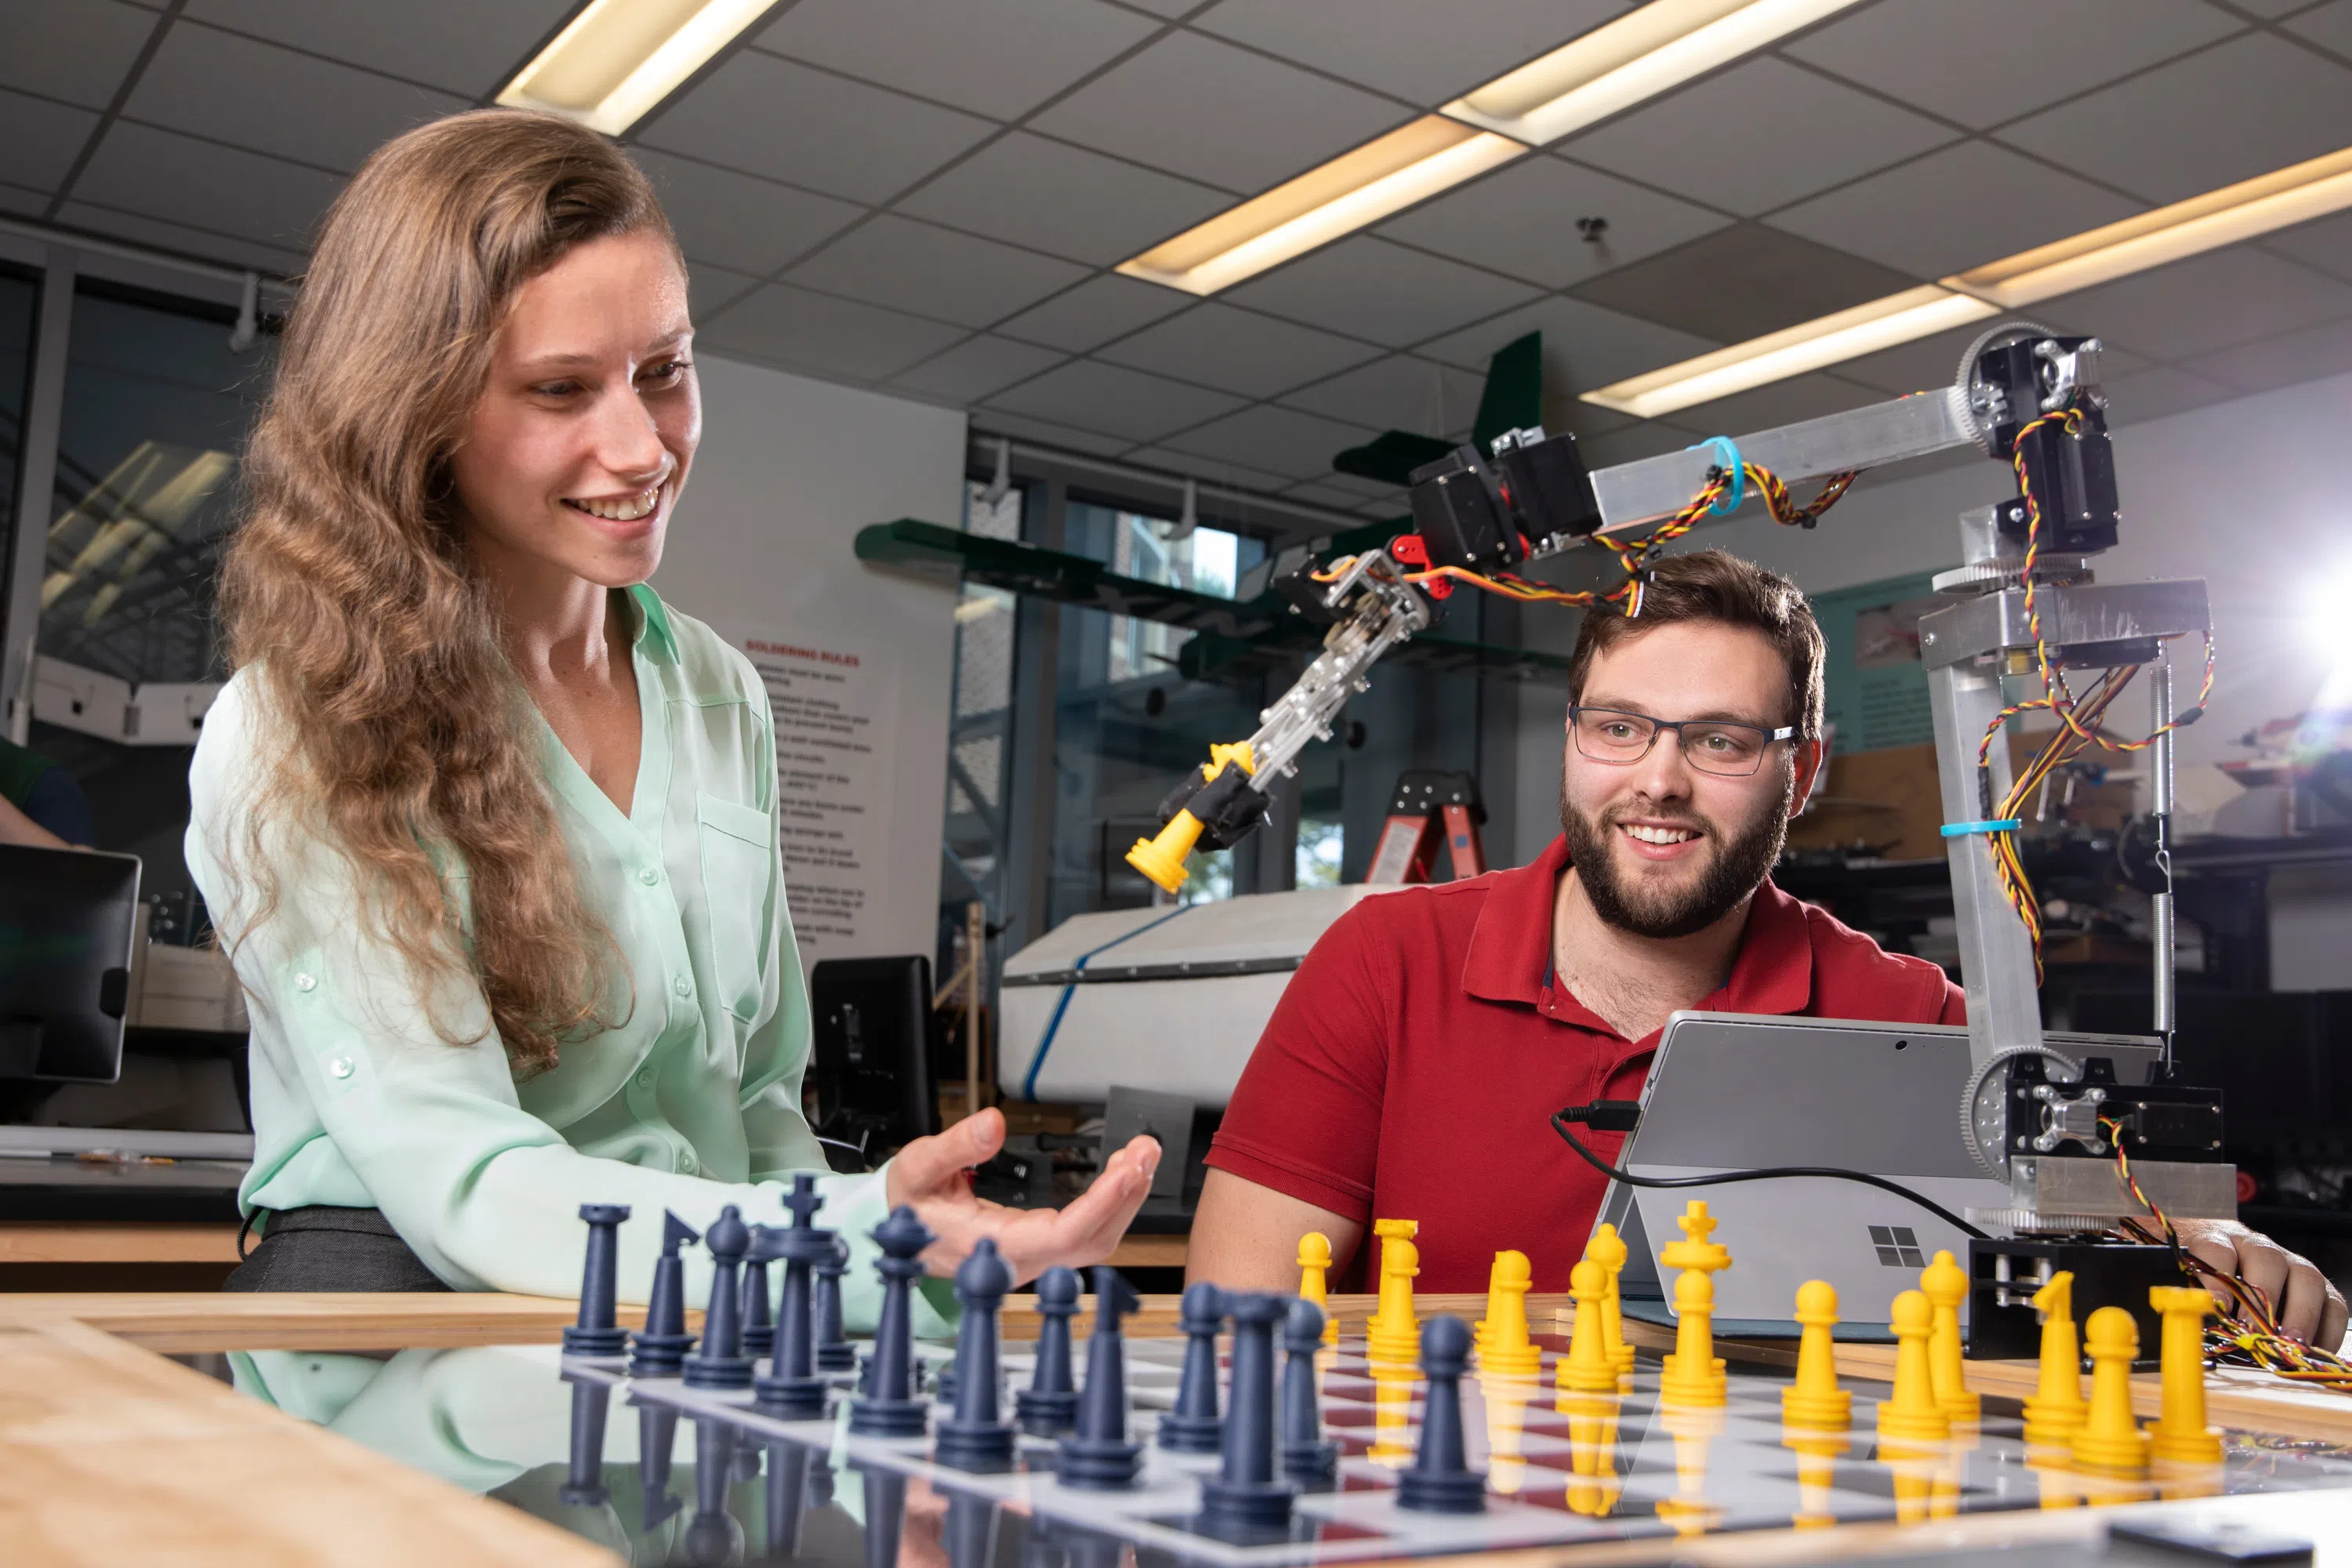 UWF engineering students work on a mechatronics project in the Science and Engineering Building.